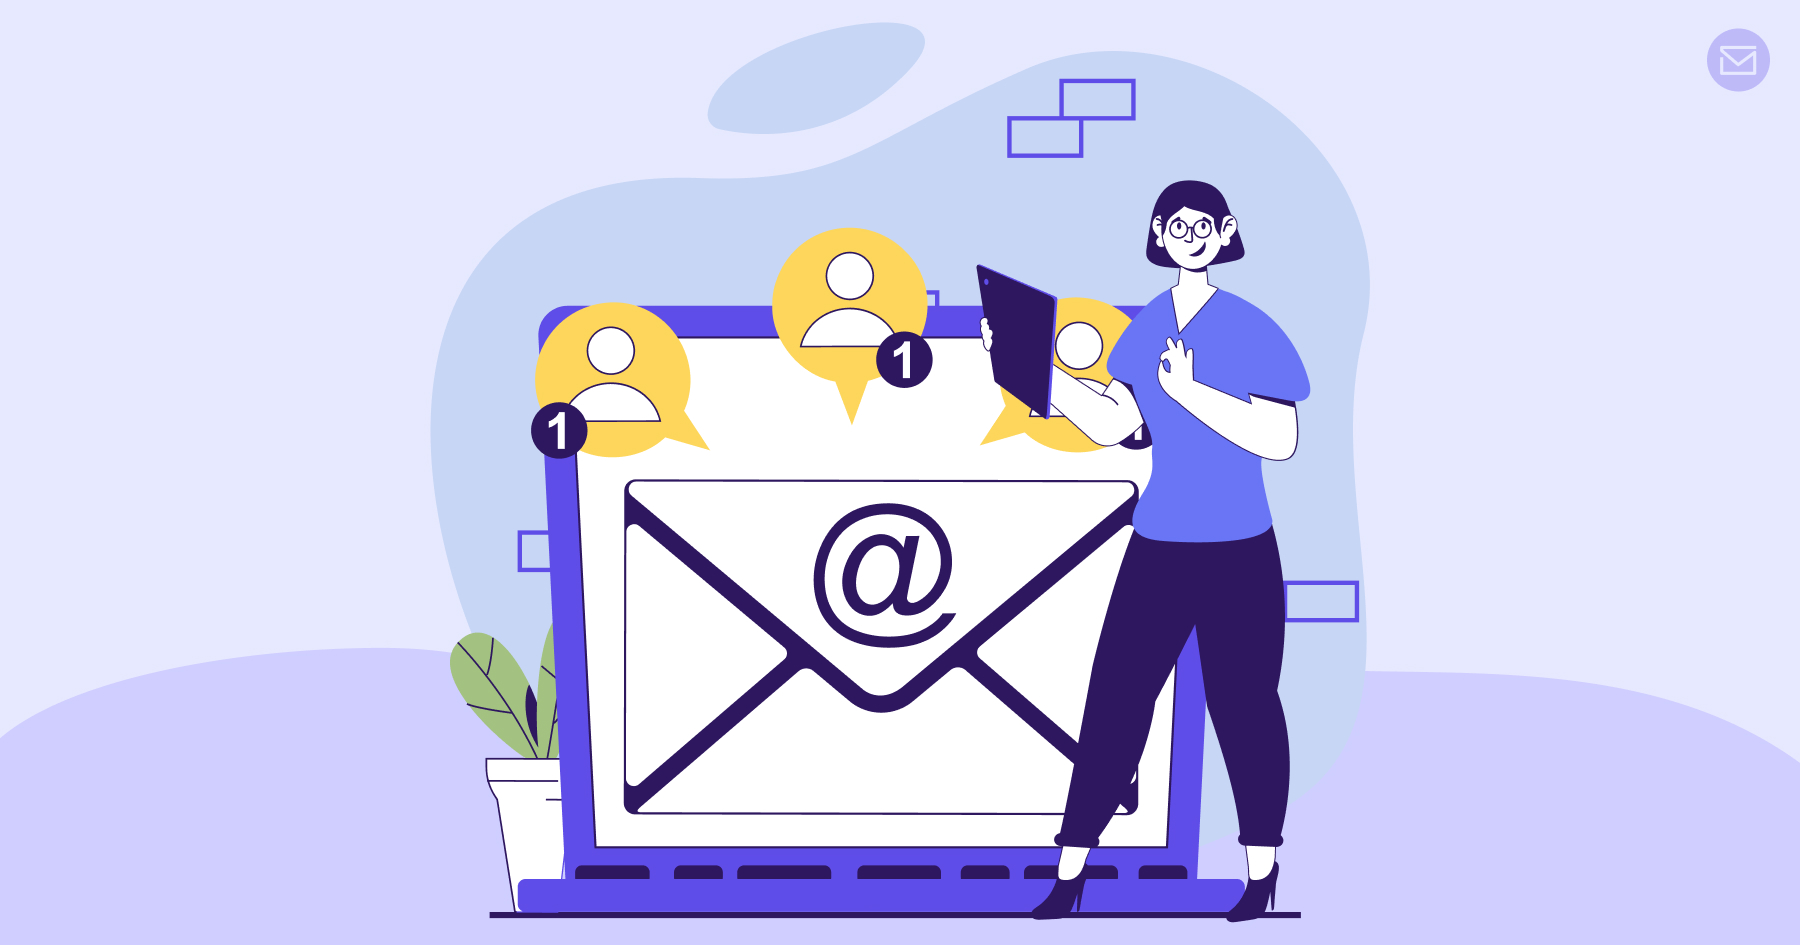 5 Email Deliverability Best Practices for Small Businesses